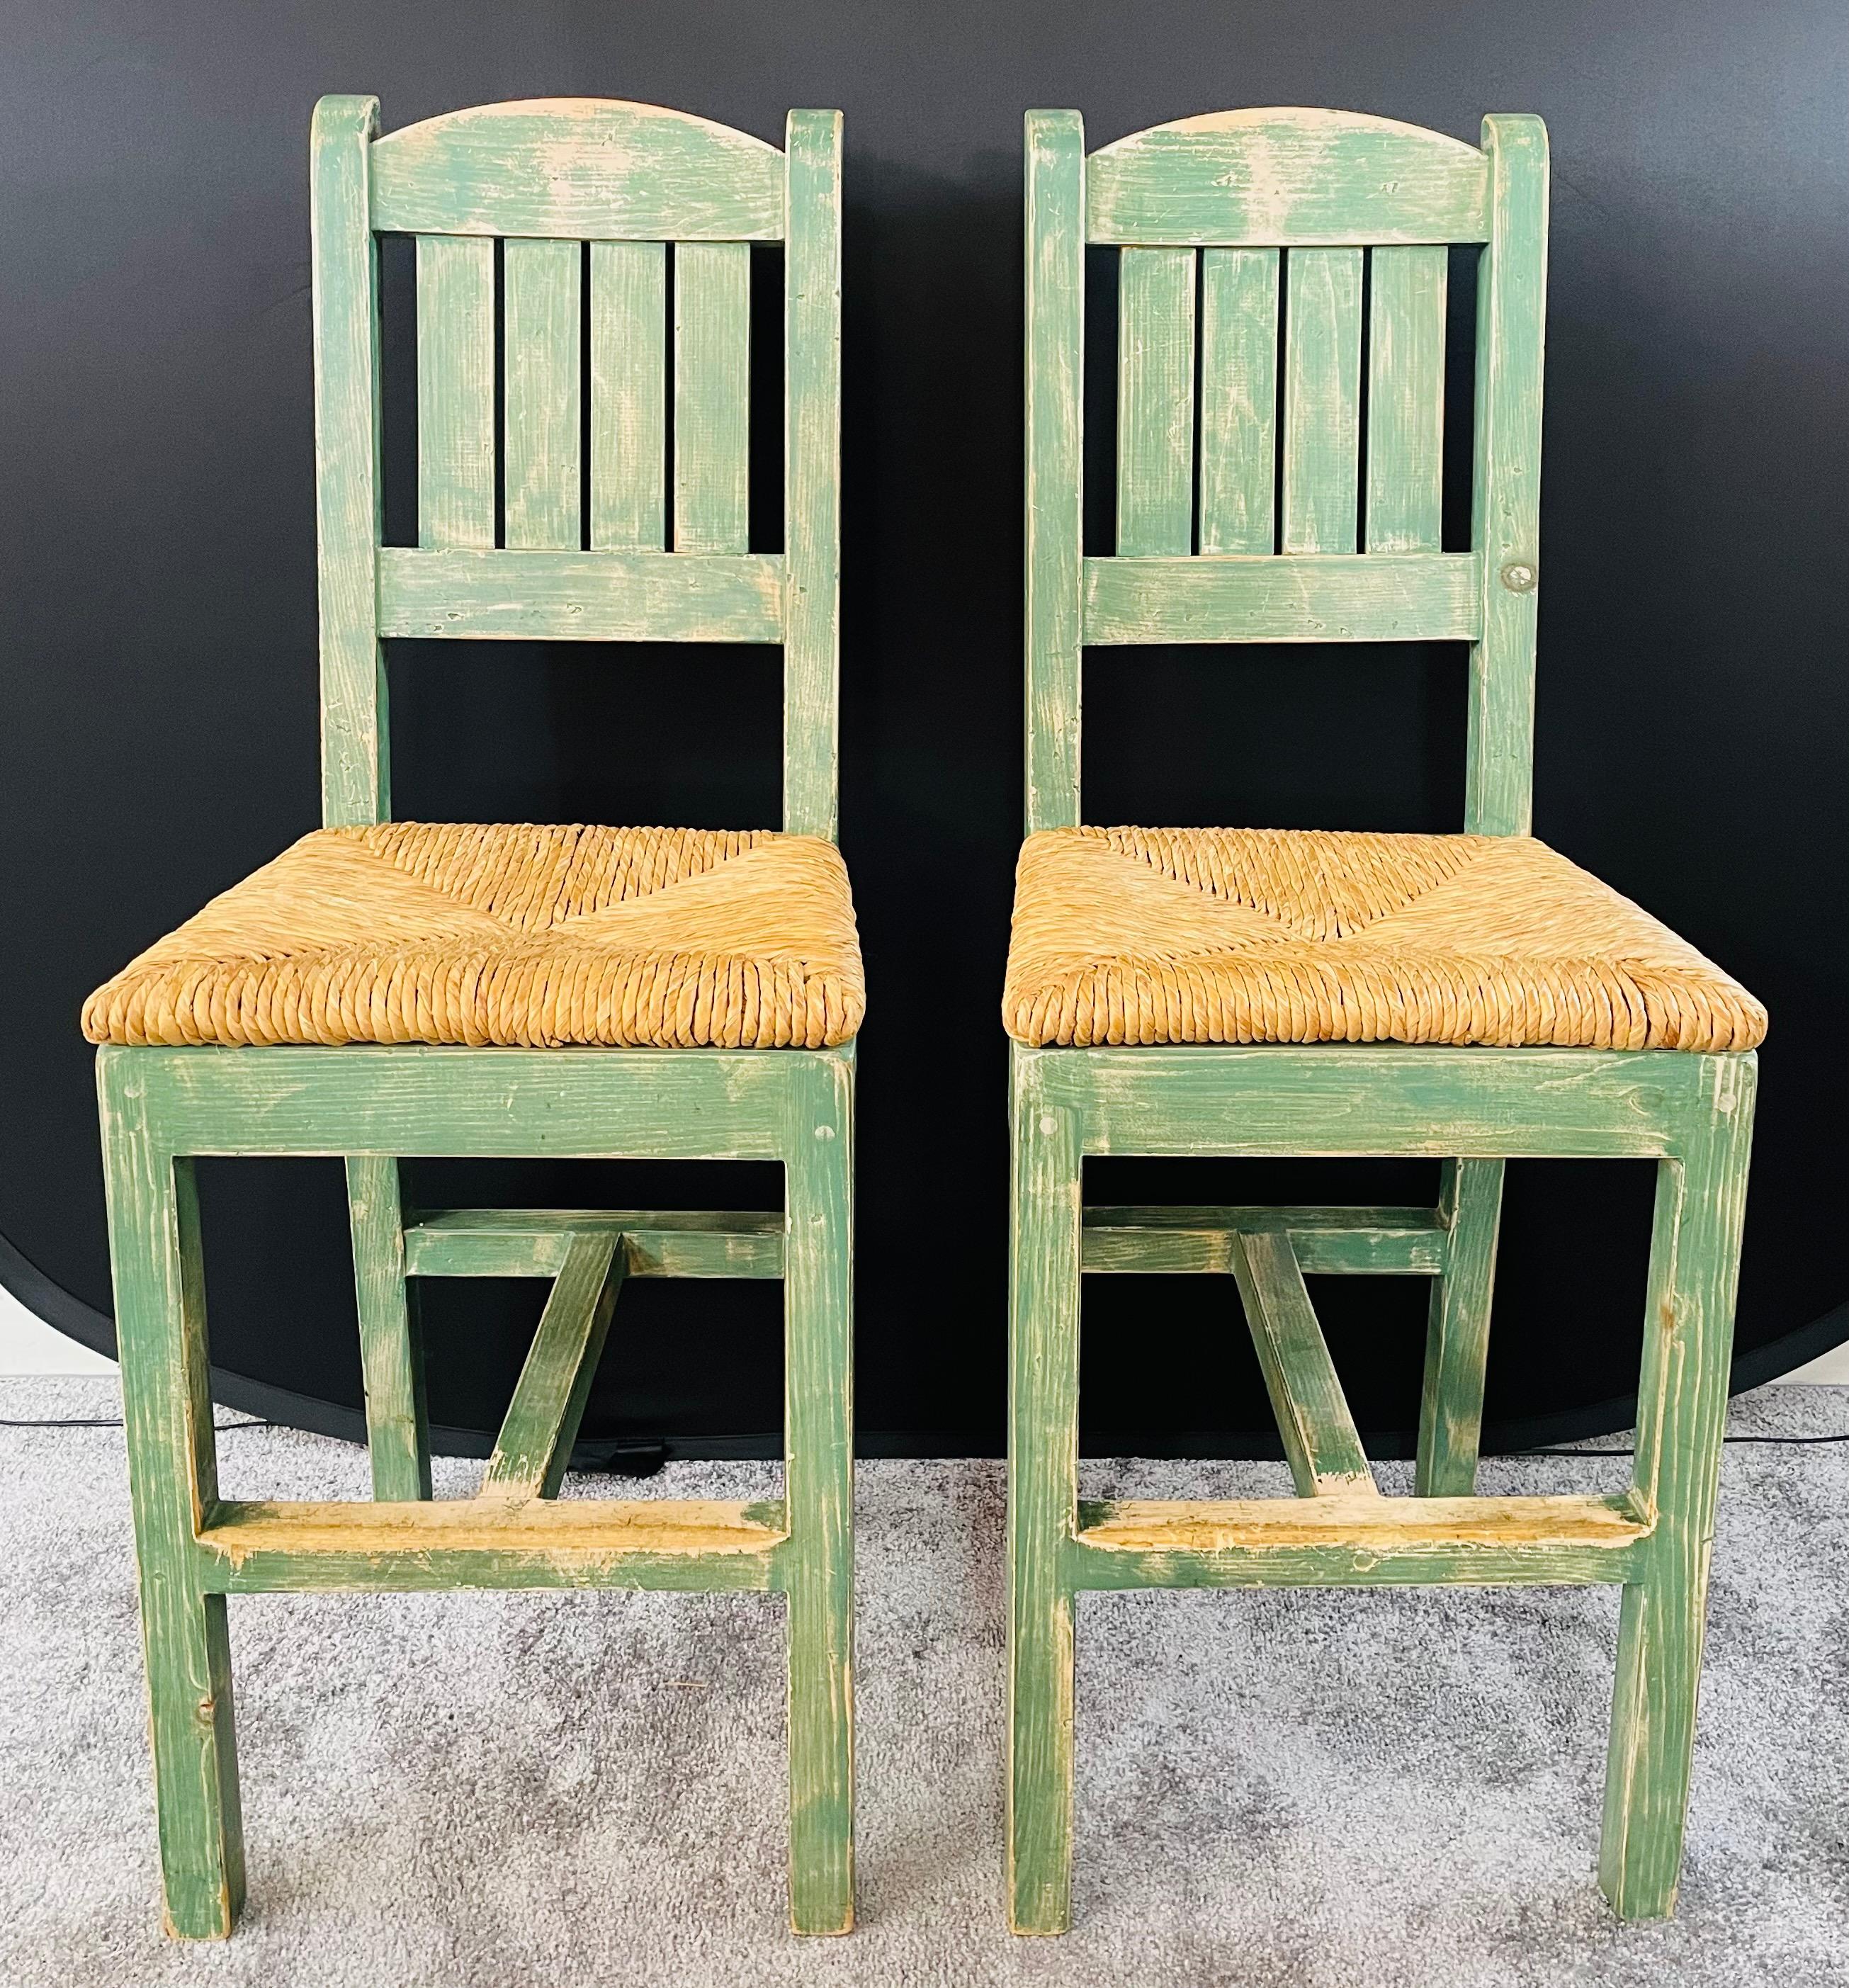 An exquisite pair of vintage French rustic style straw seat bar stools , featuring a distressed green turquoise color. The stools frame is made of wood and the handwoven straw seat is made is a nice triangles motif. The stylish stools will be a nice